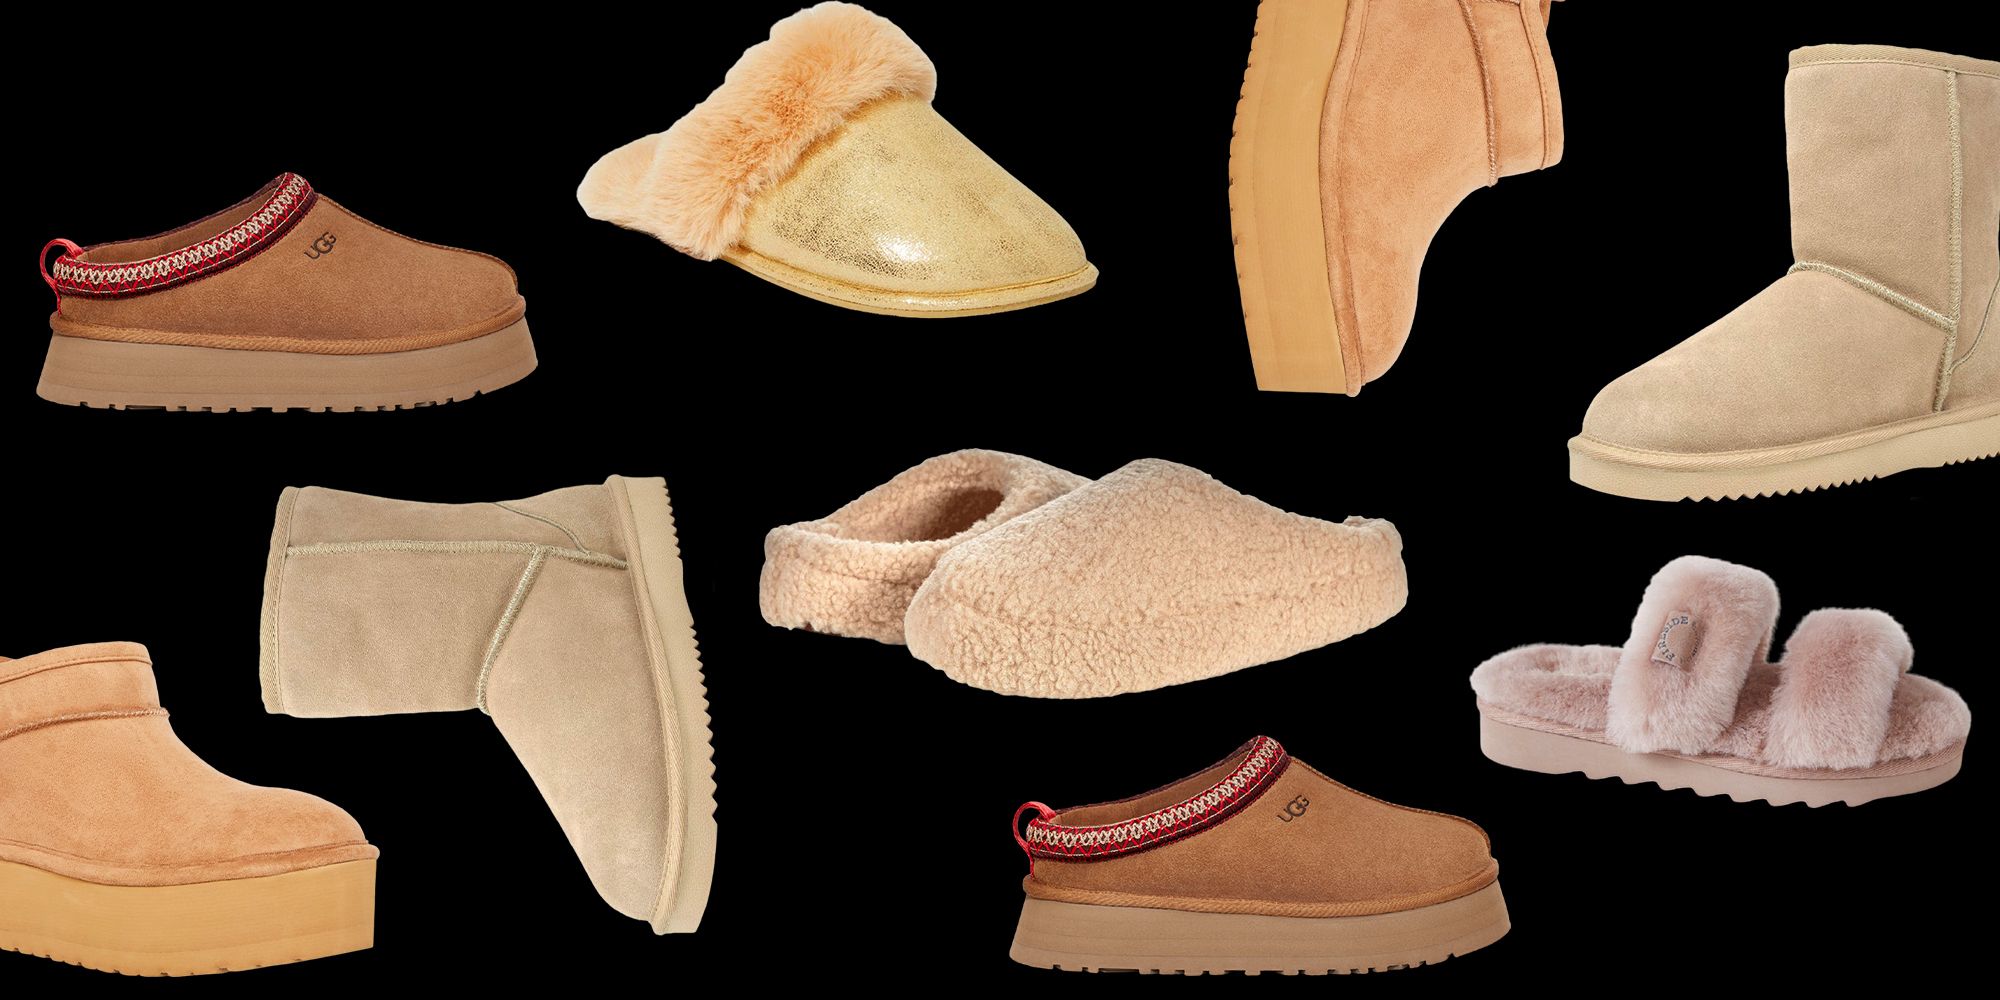 Shoppers Say These $29 Slipper Boots Are as Soft as Clouds